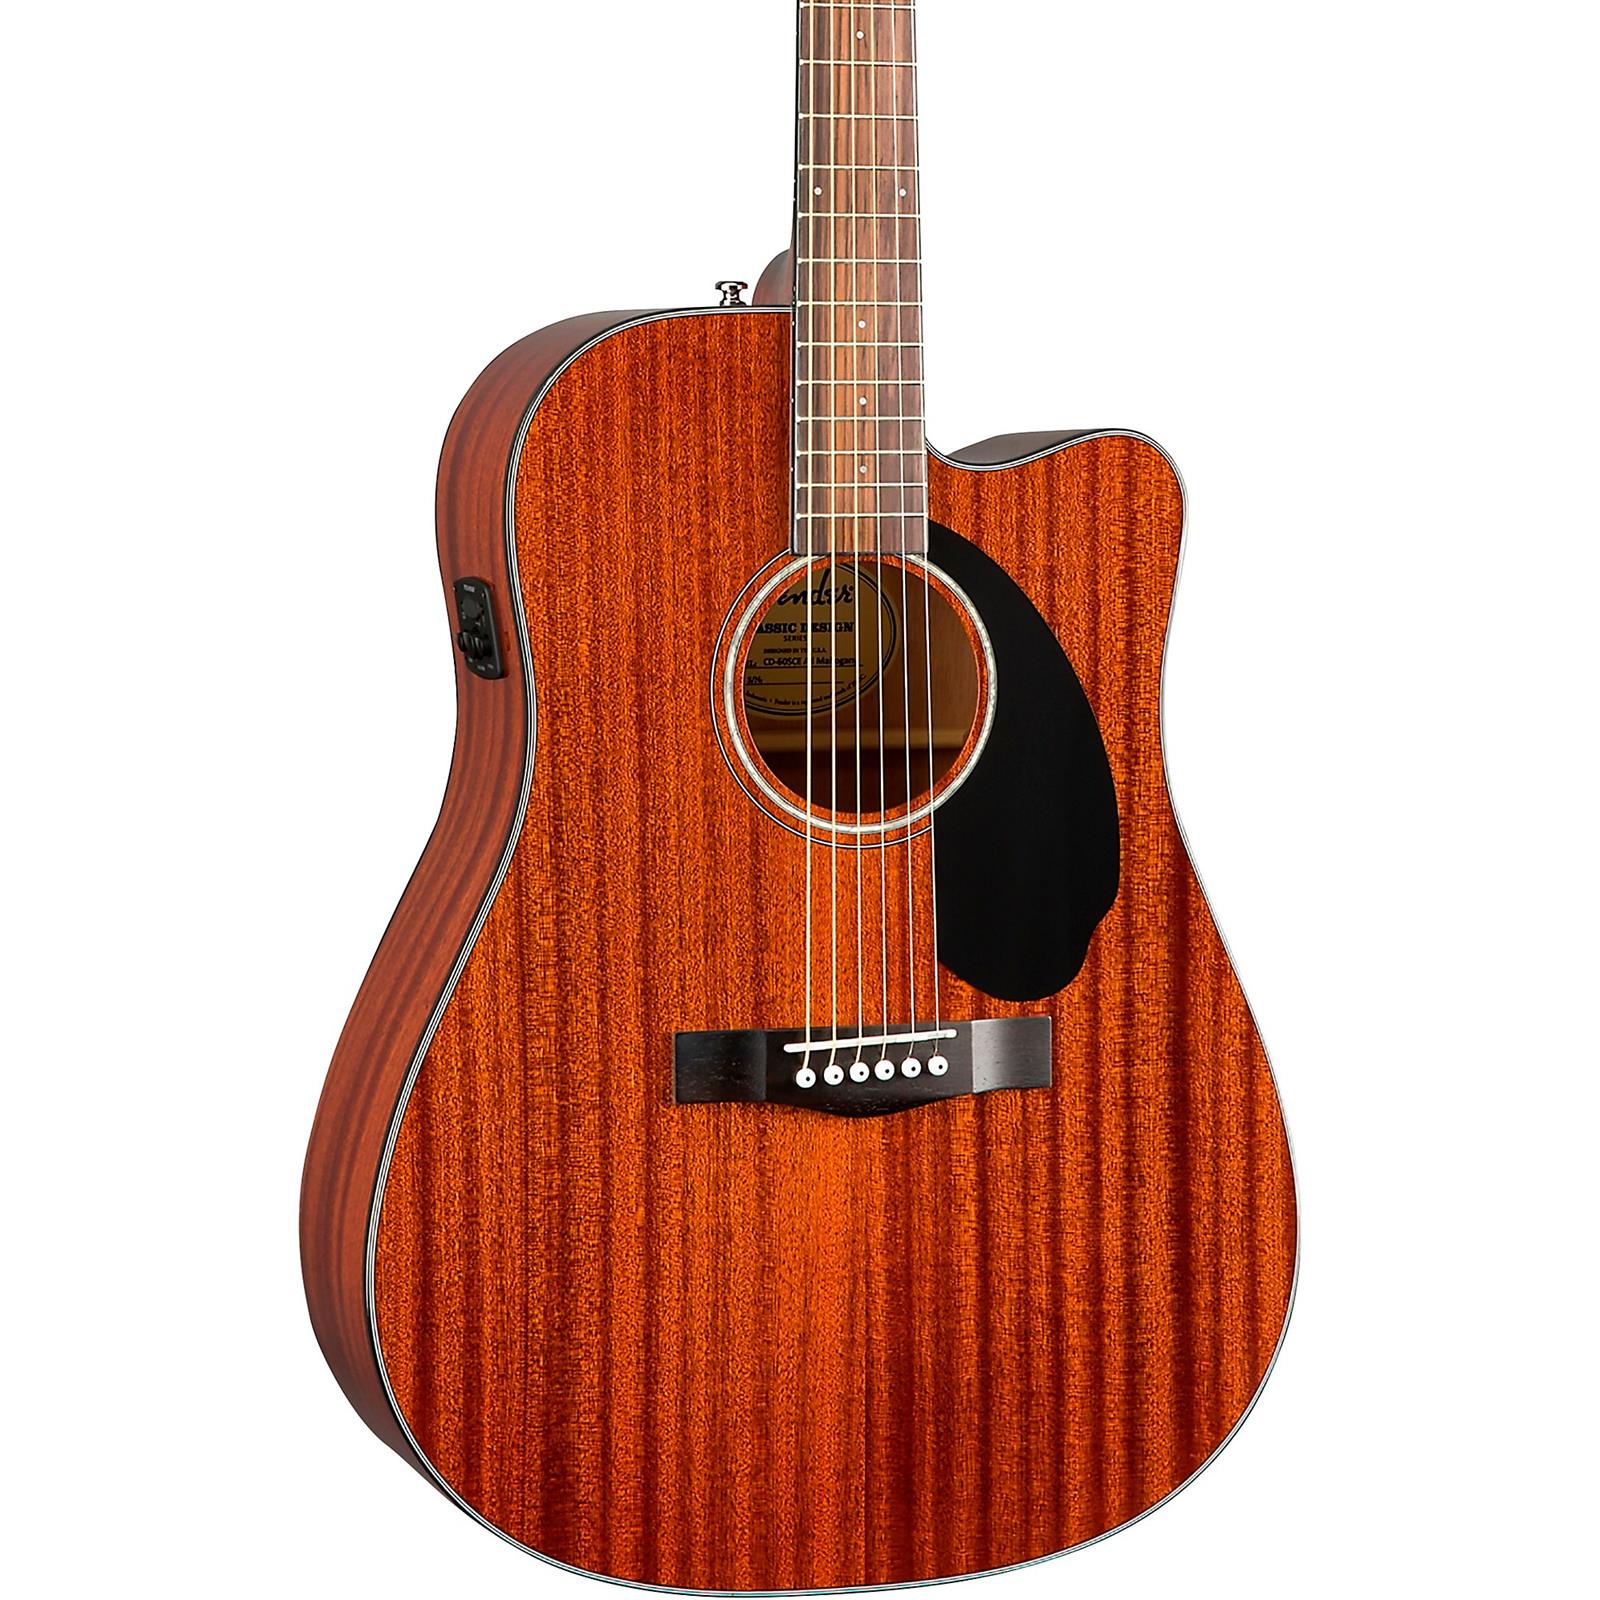 Fender CD-60SCE Dreadnought All-Mahogany Acoustic-Electric Guitar